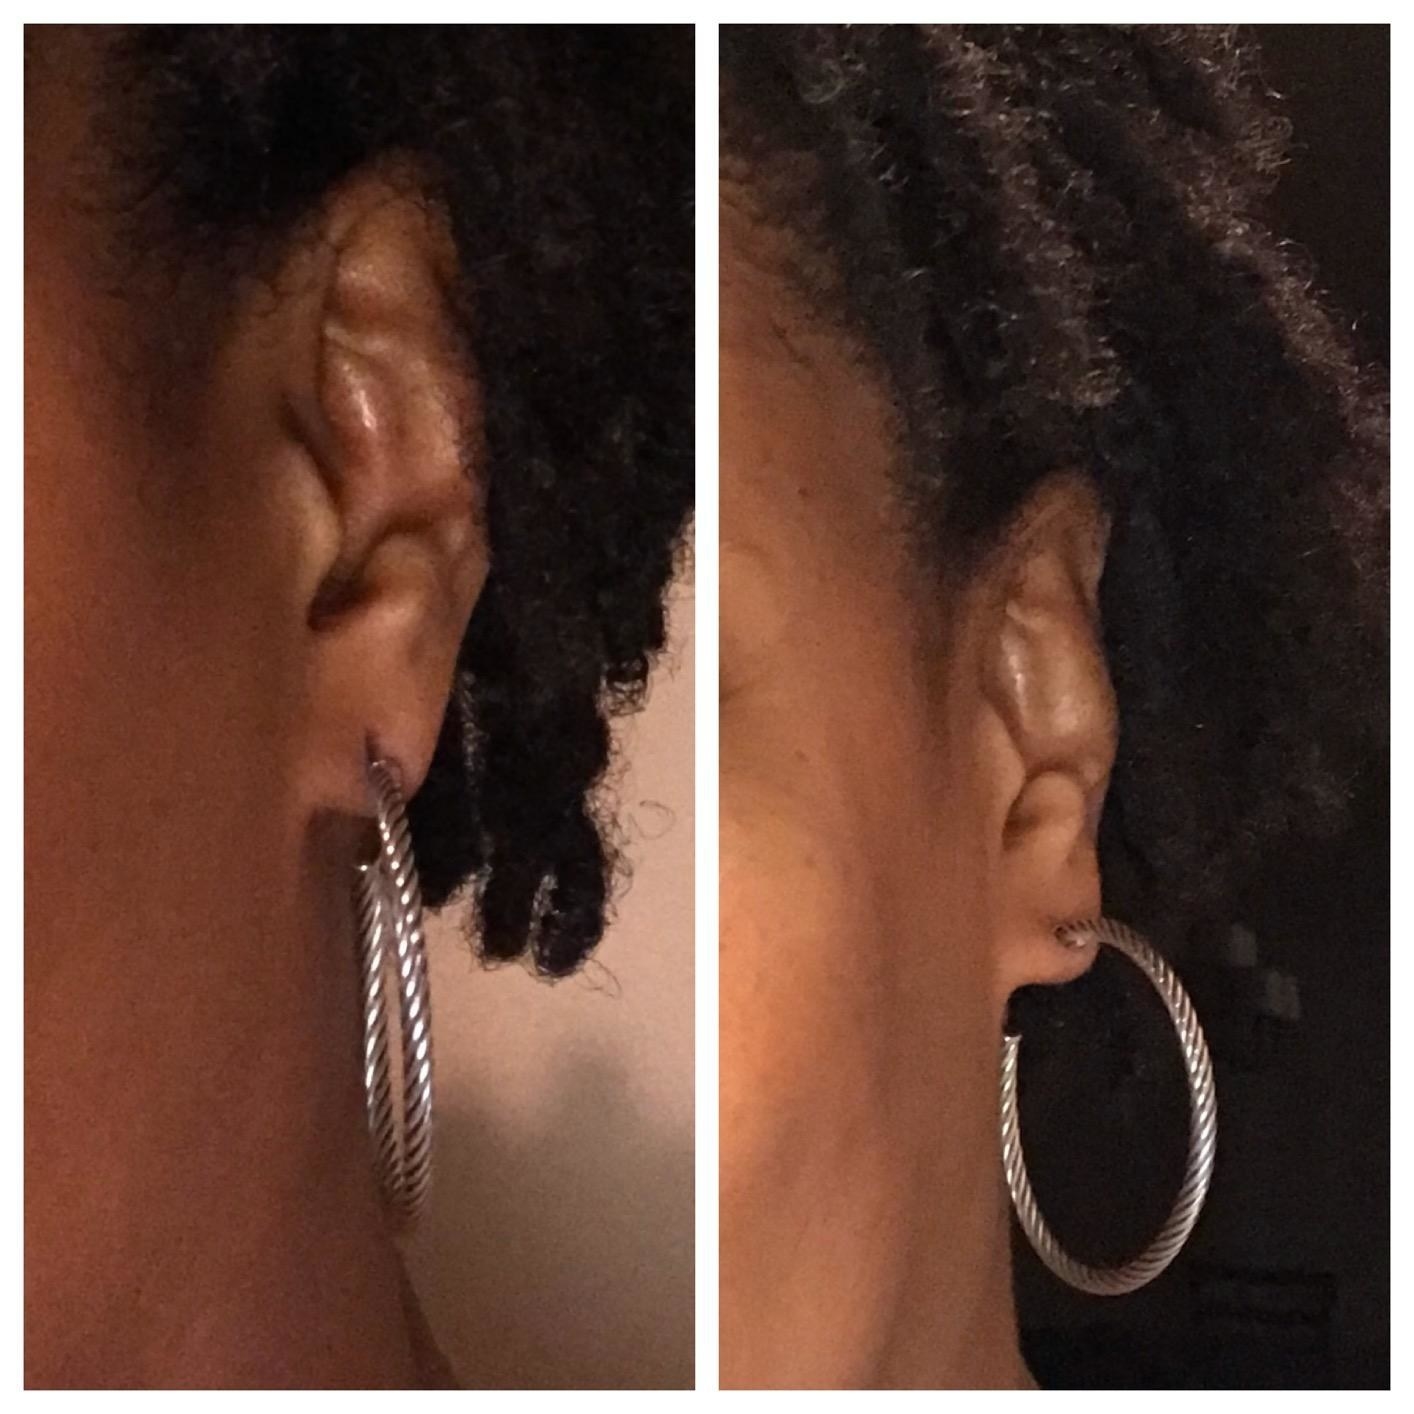 Amazon reviewer showing before and after effects of using ear lobe patches with heavy hoop earrings